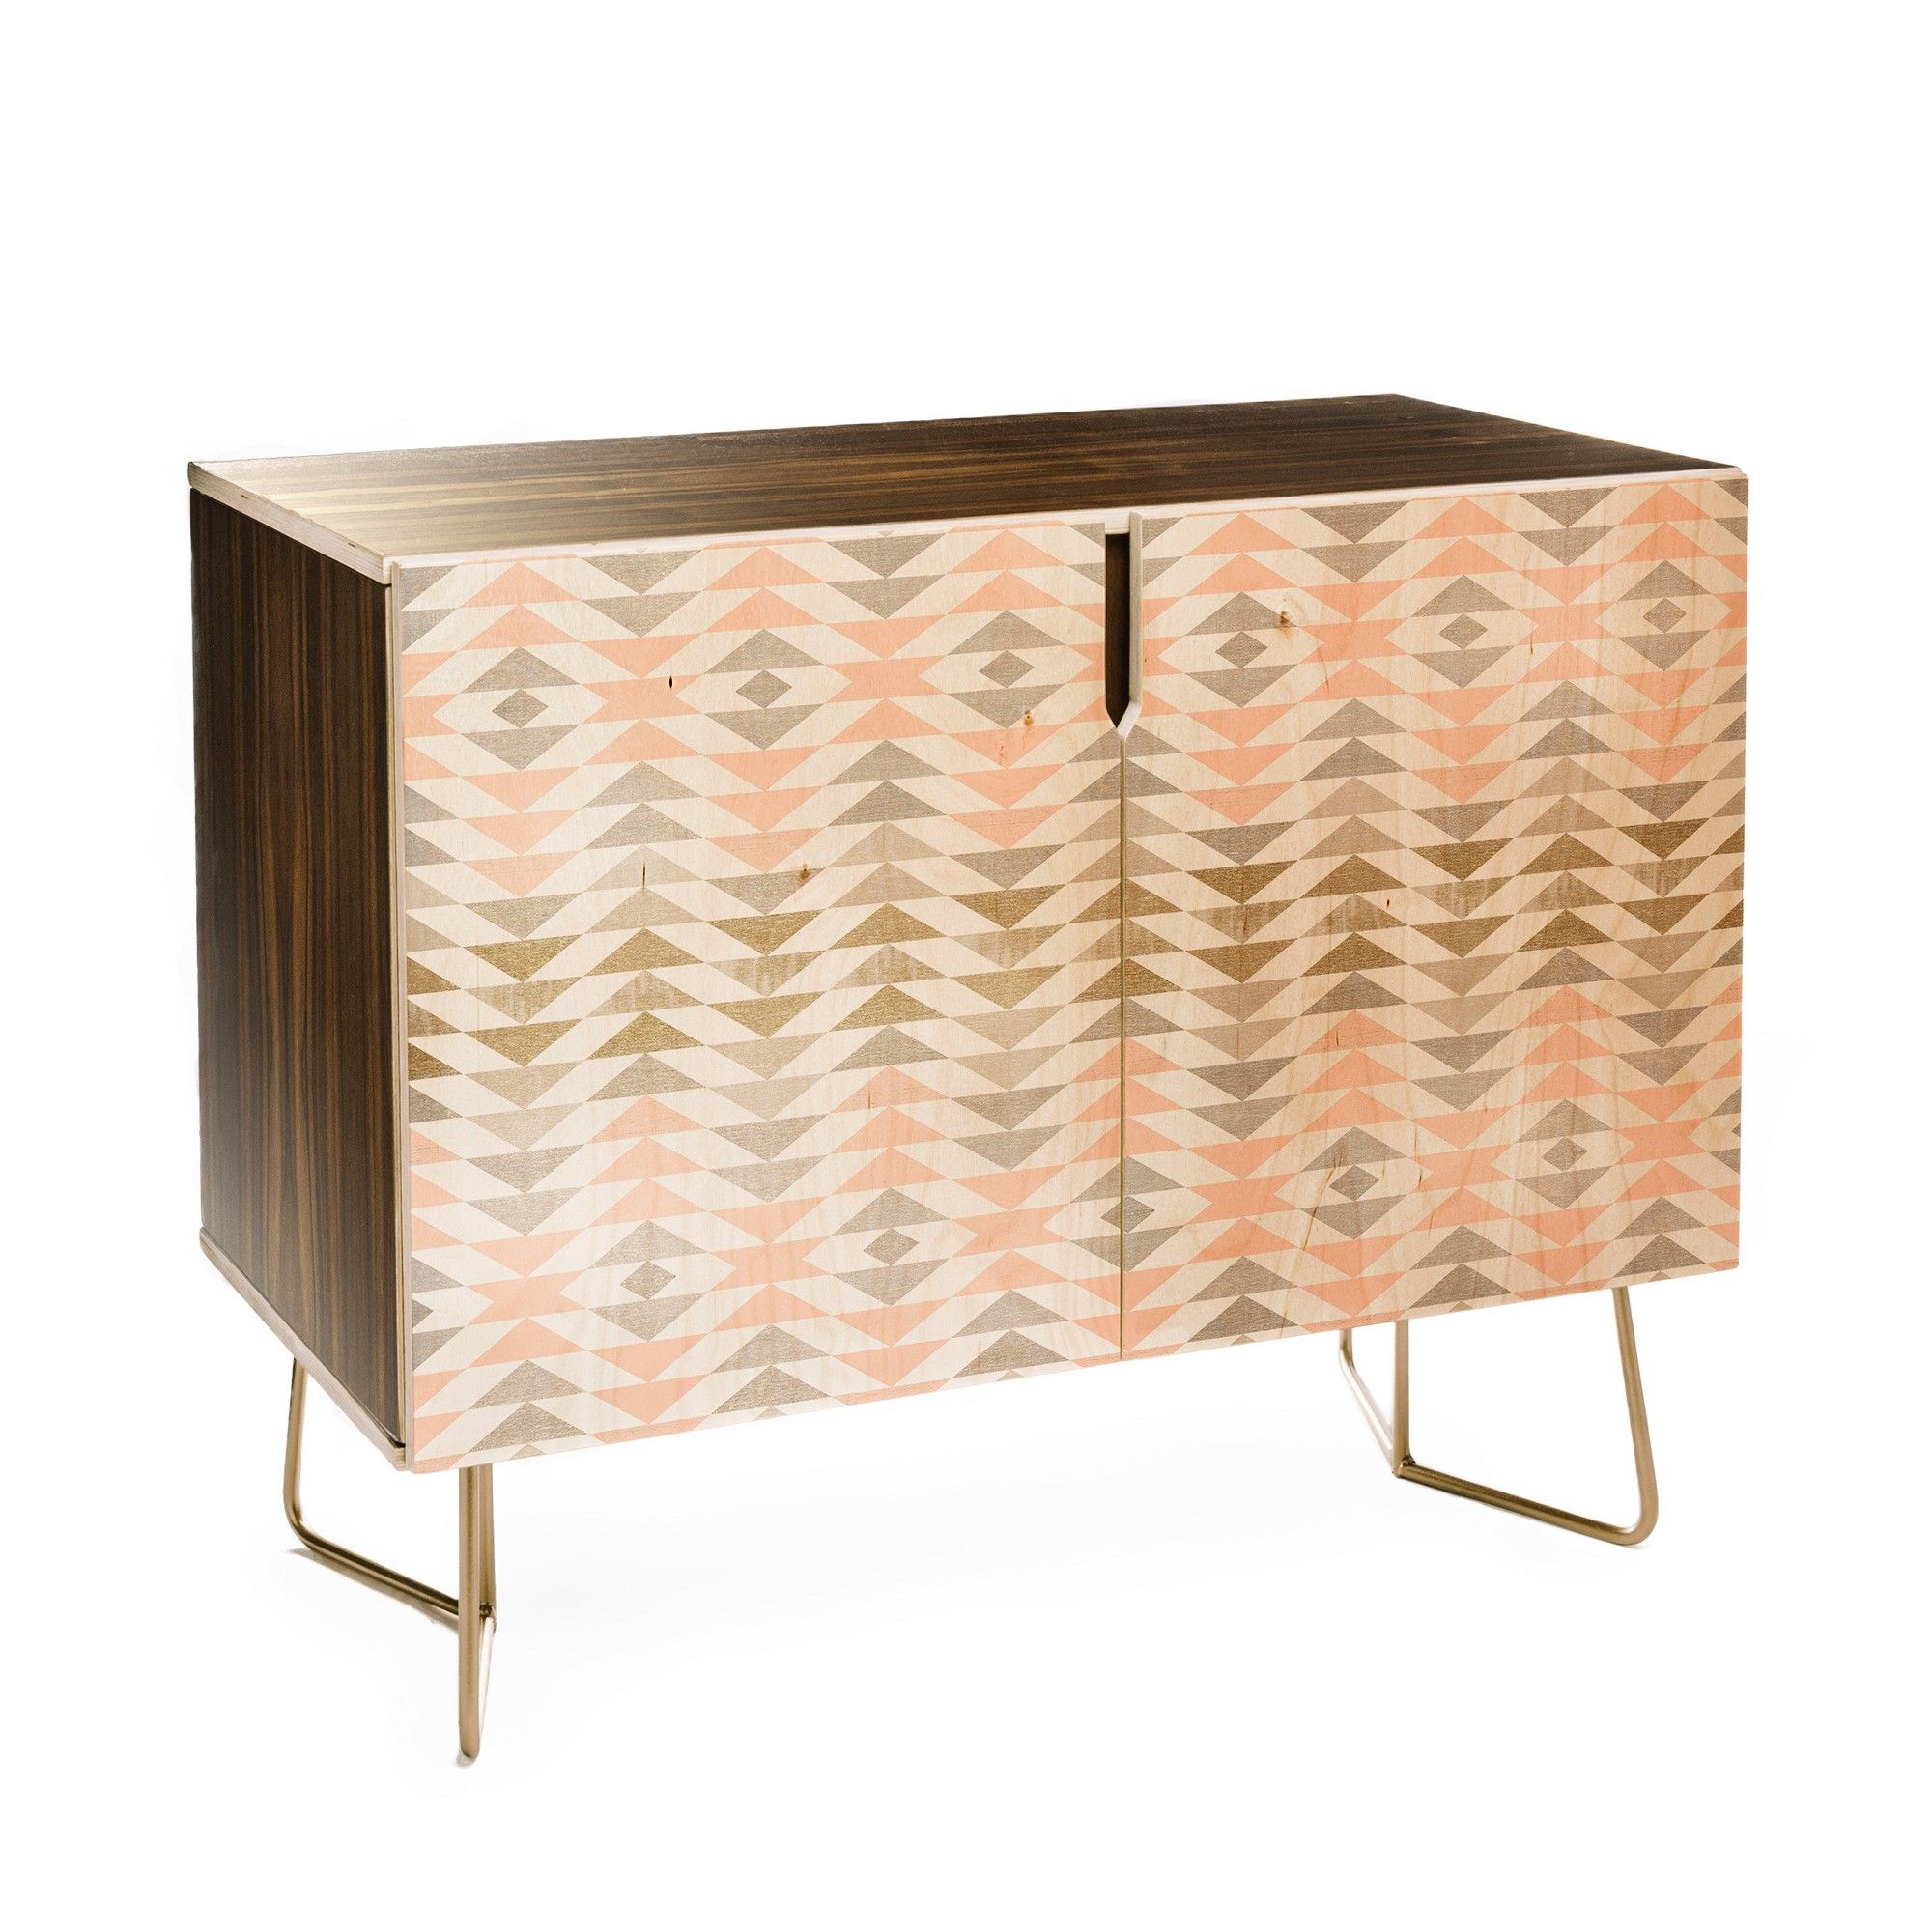 Georgiana Paraschiv Metal Triangles Credenza With Gold Aston For Modele 7 Geometric Credenzas (View 17 of 30)